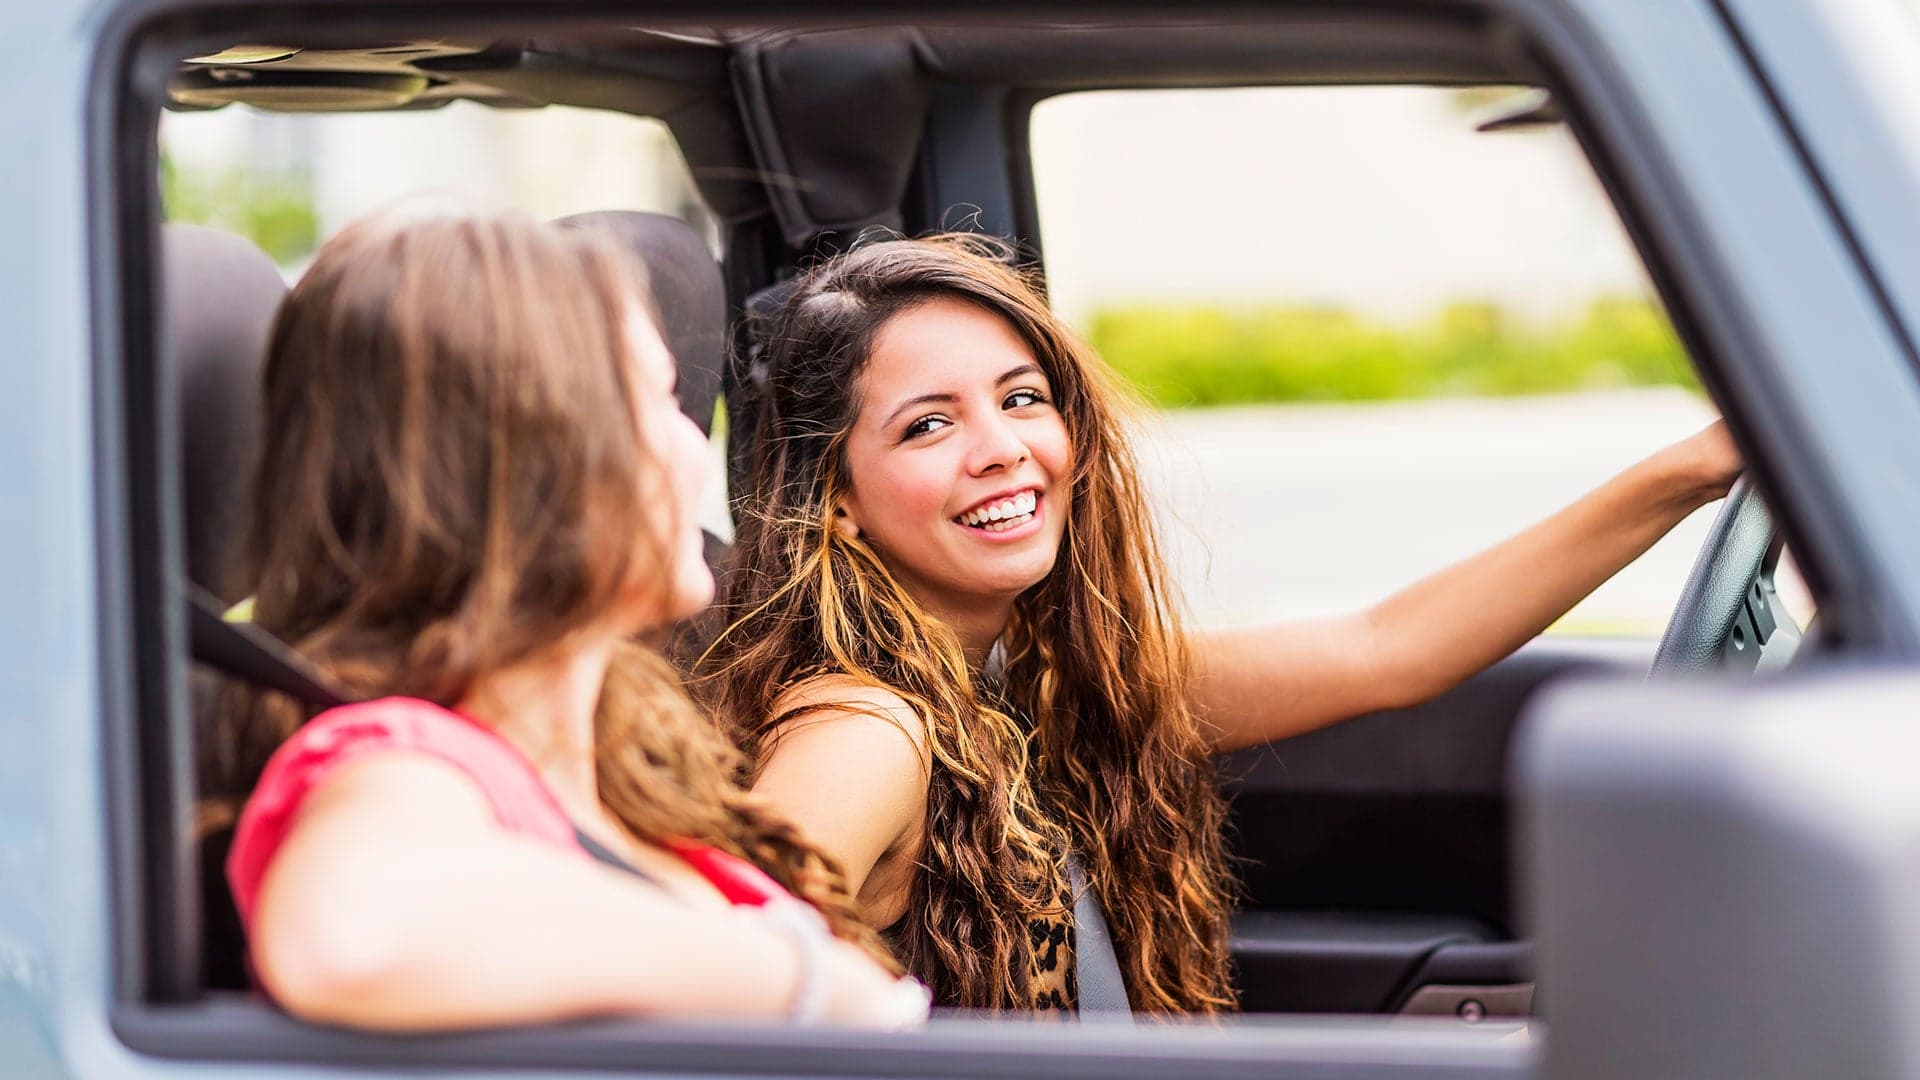 Generation Z for the Win: Today’s Teenagers Actually Want to Drive